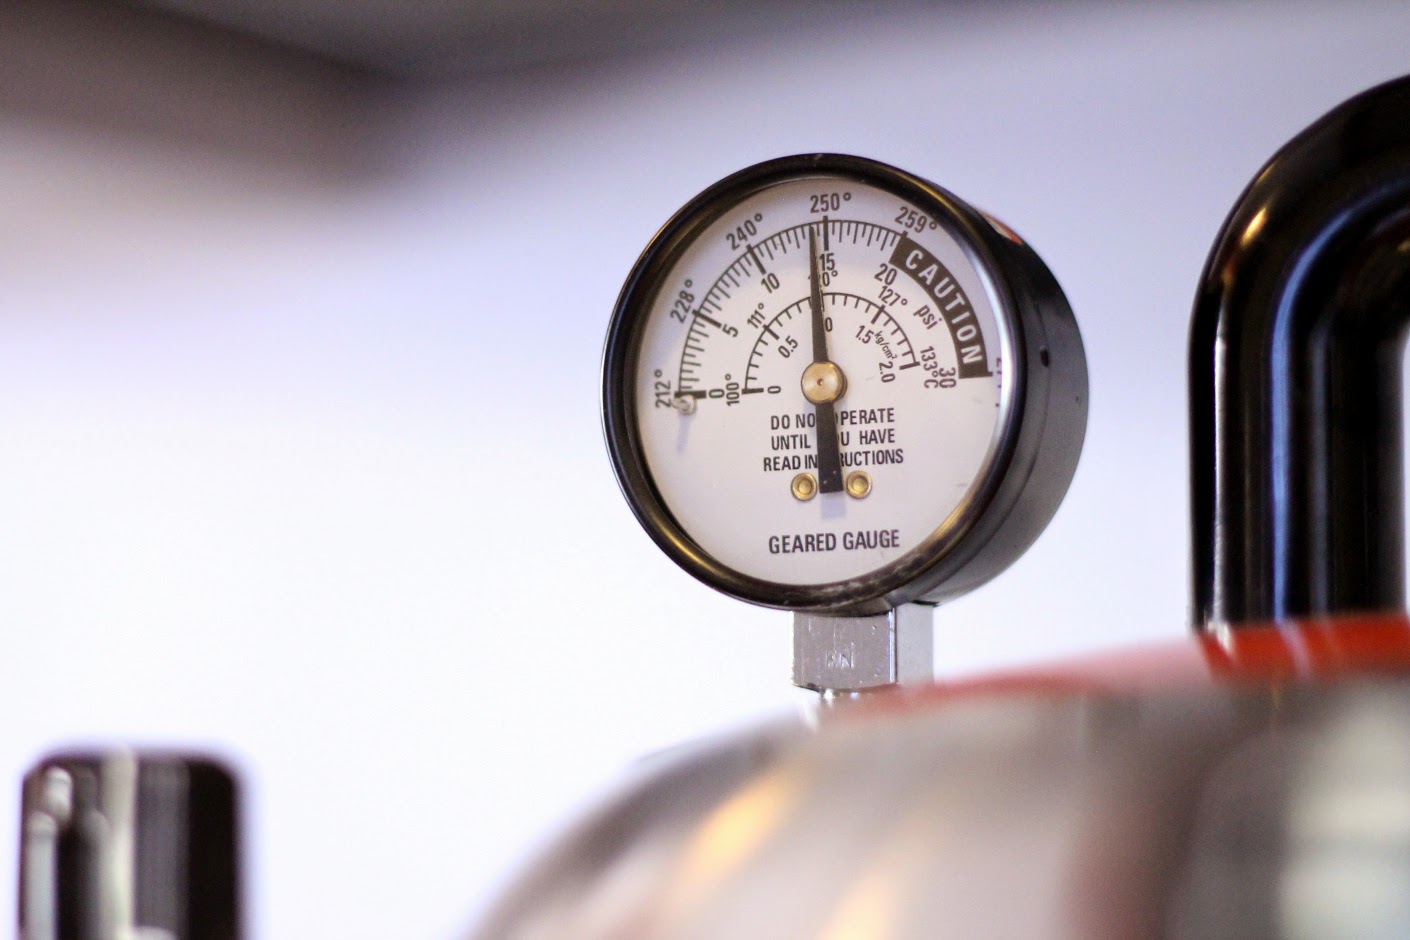 The pressure gauge, nearly to 15 PSI.